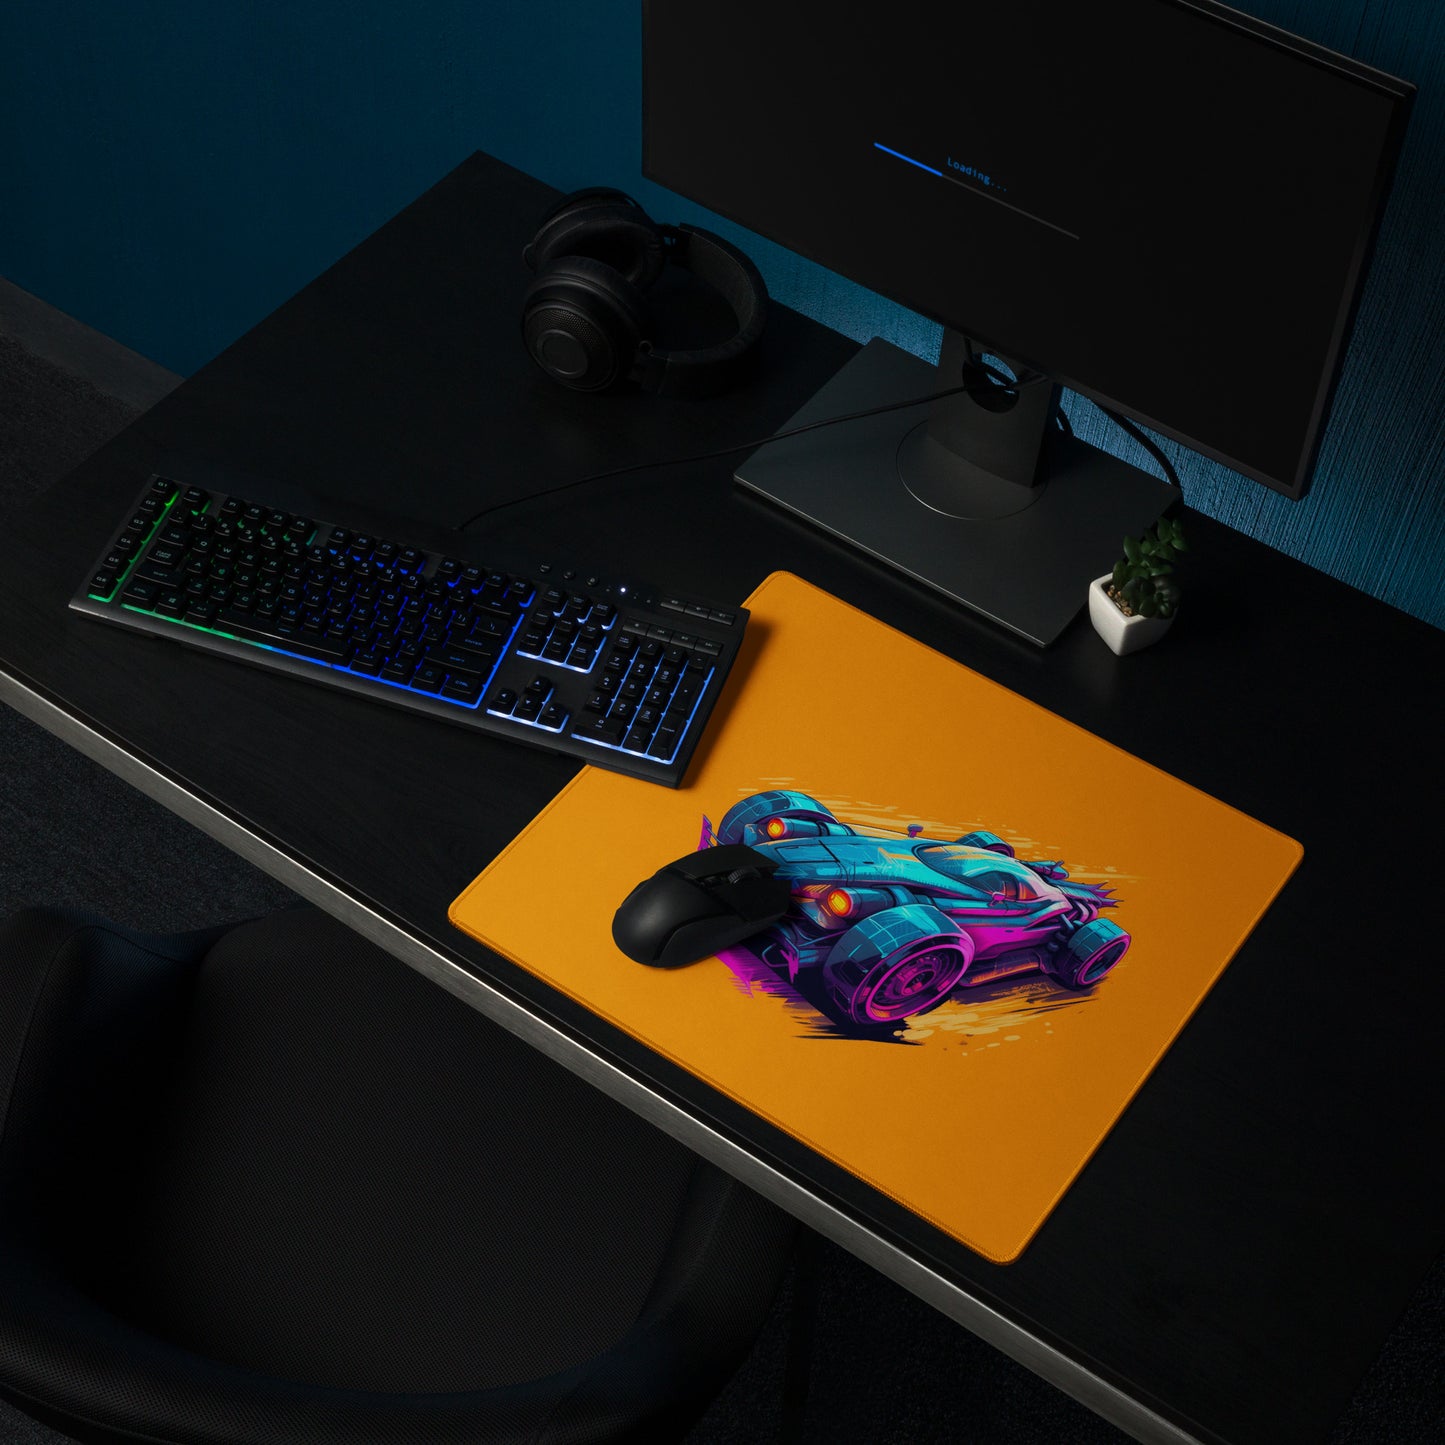 An 18" x 16" mouse pad with a futuristic race car displayed on a desk setup. Orange in color.